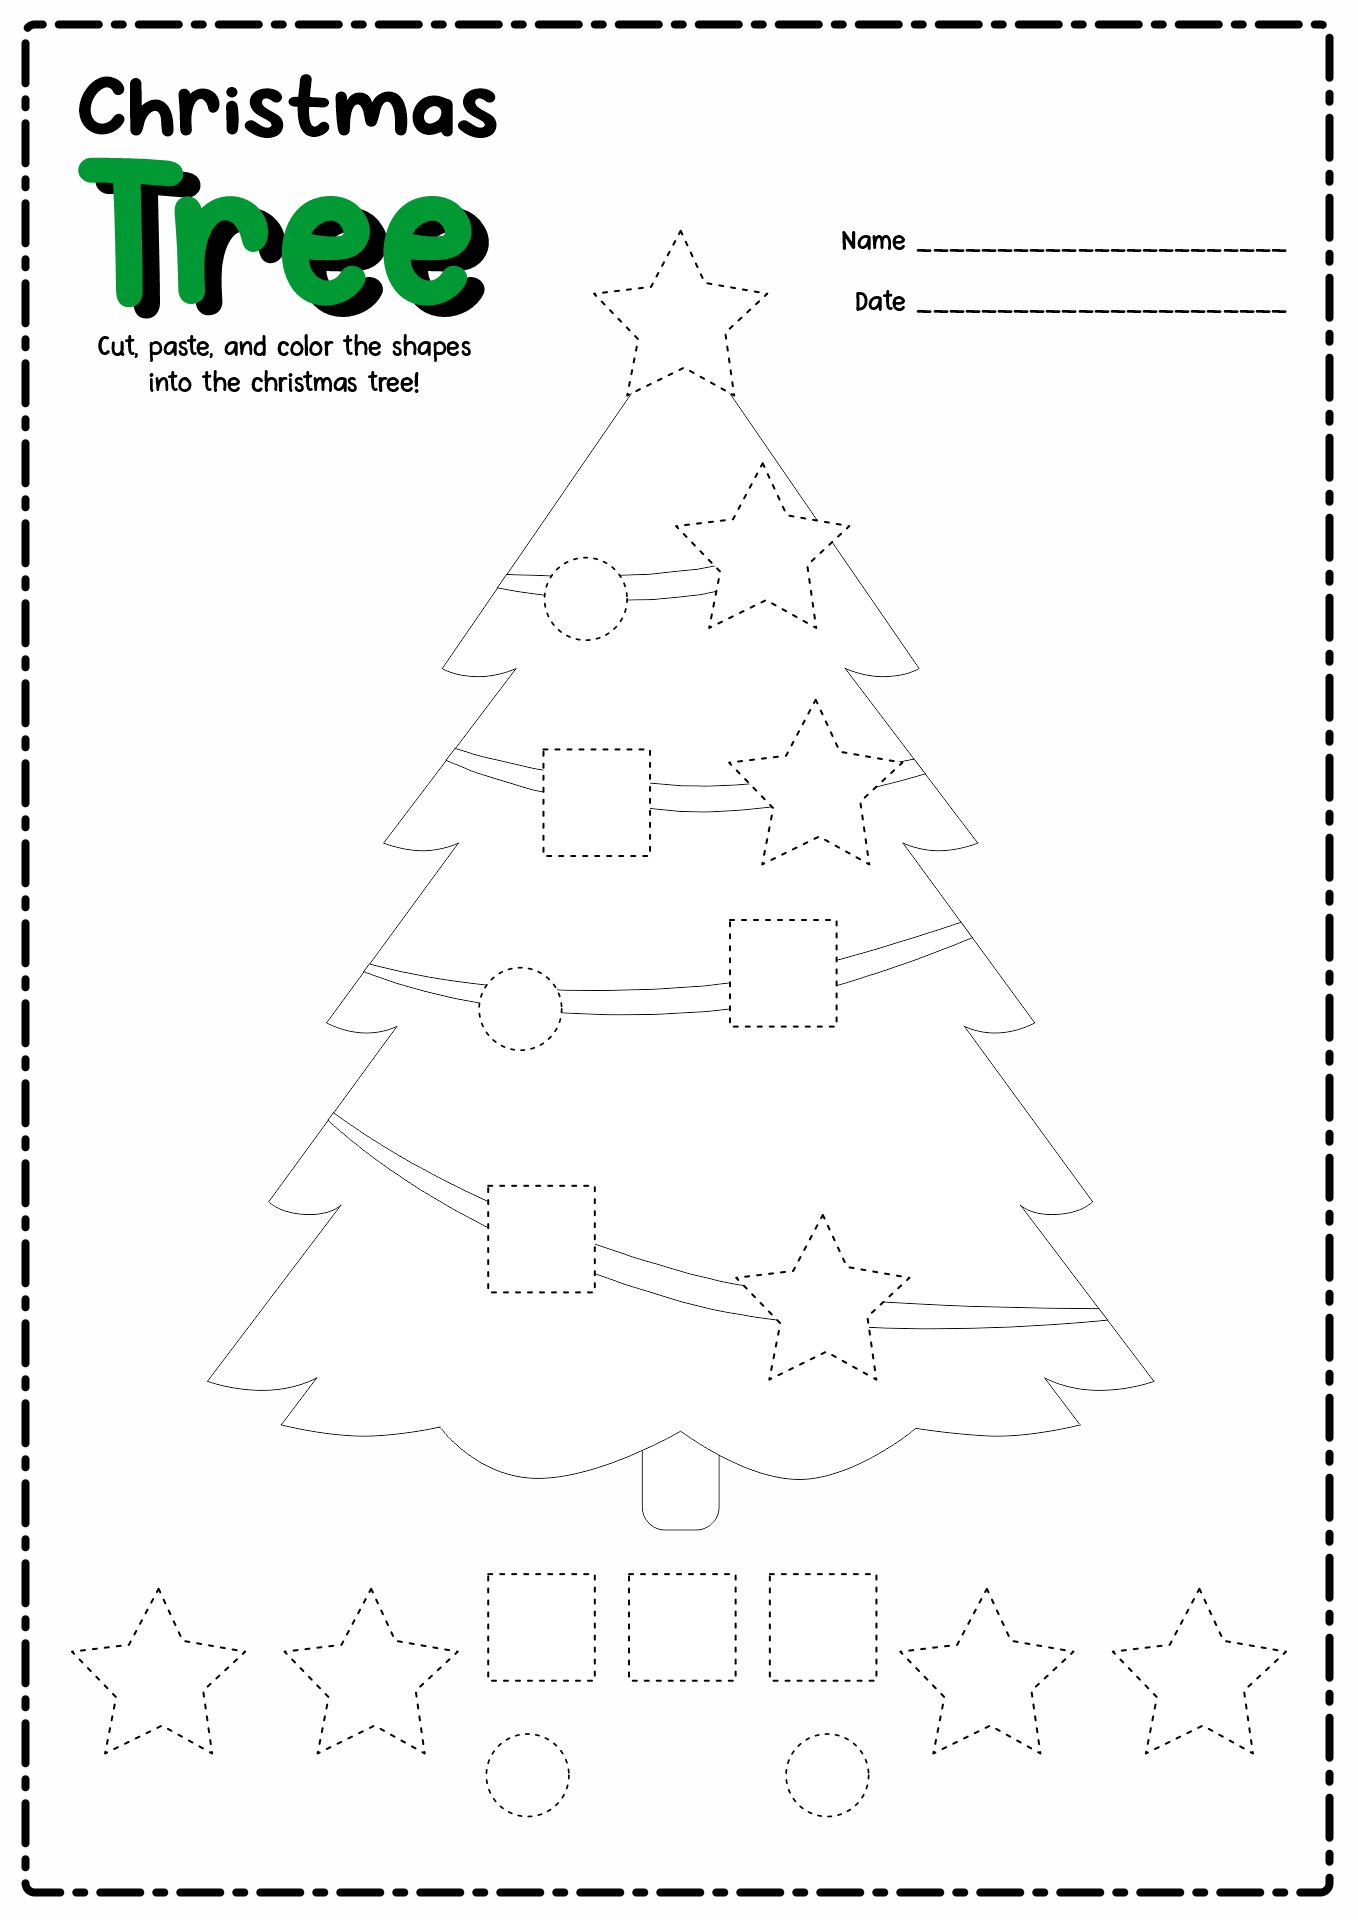 Christmas Tree Cut and Paste Activity Image